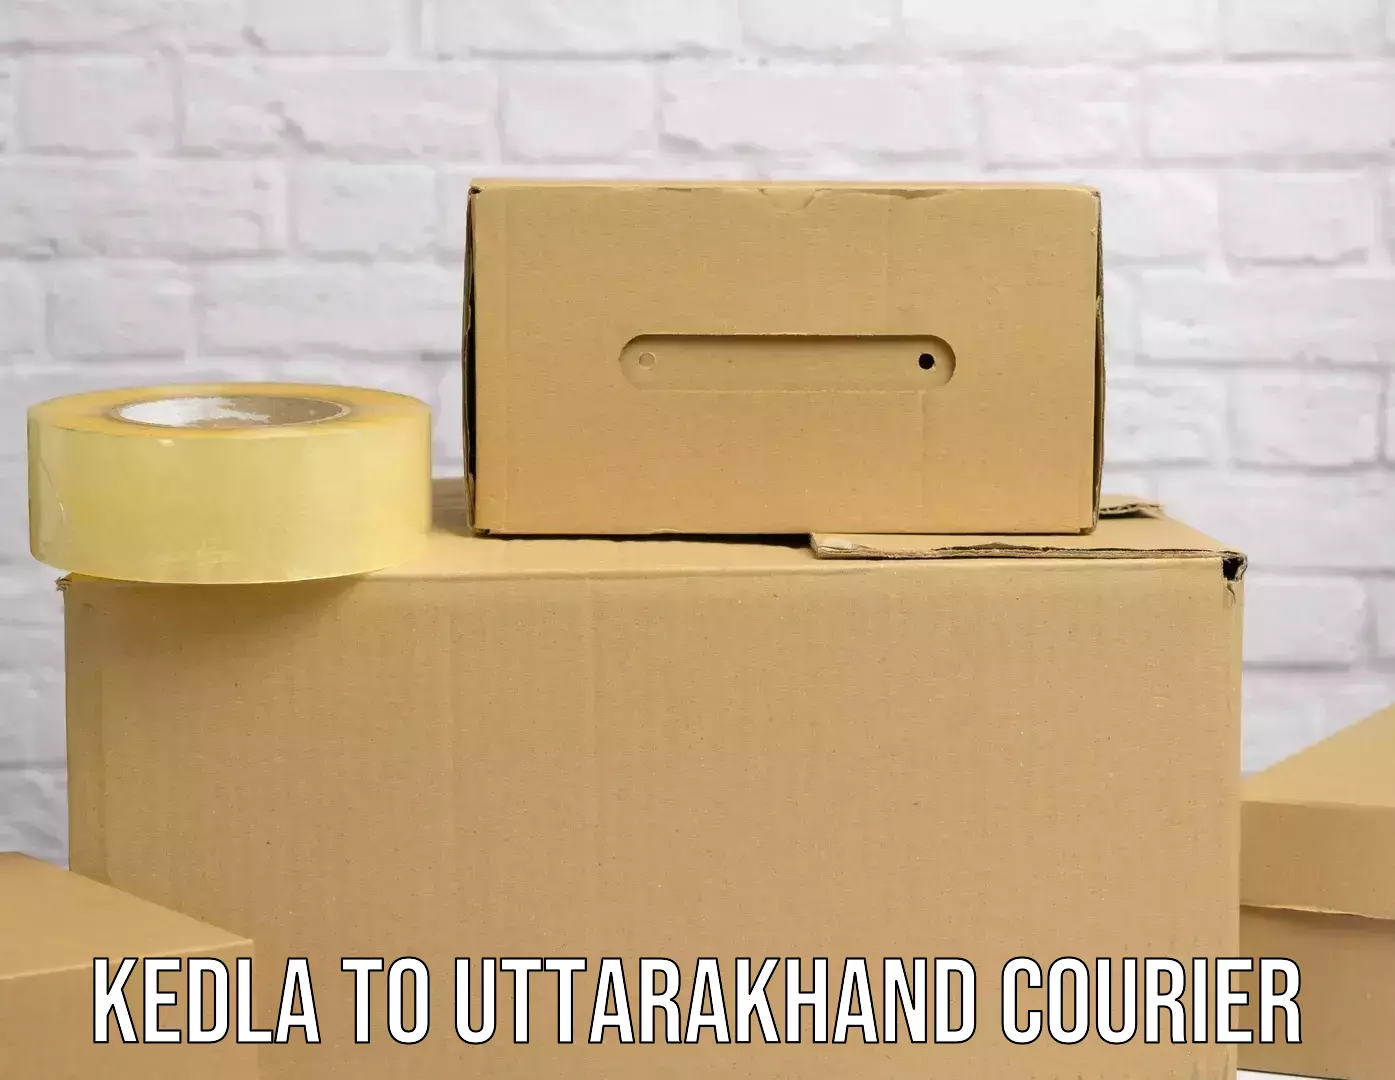 State-of-the-art courier technology Kedla to Rishikesh